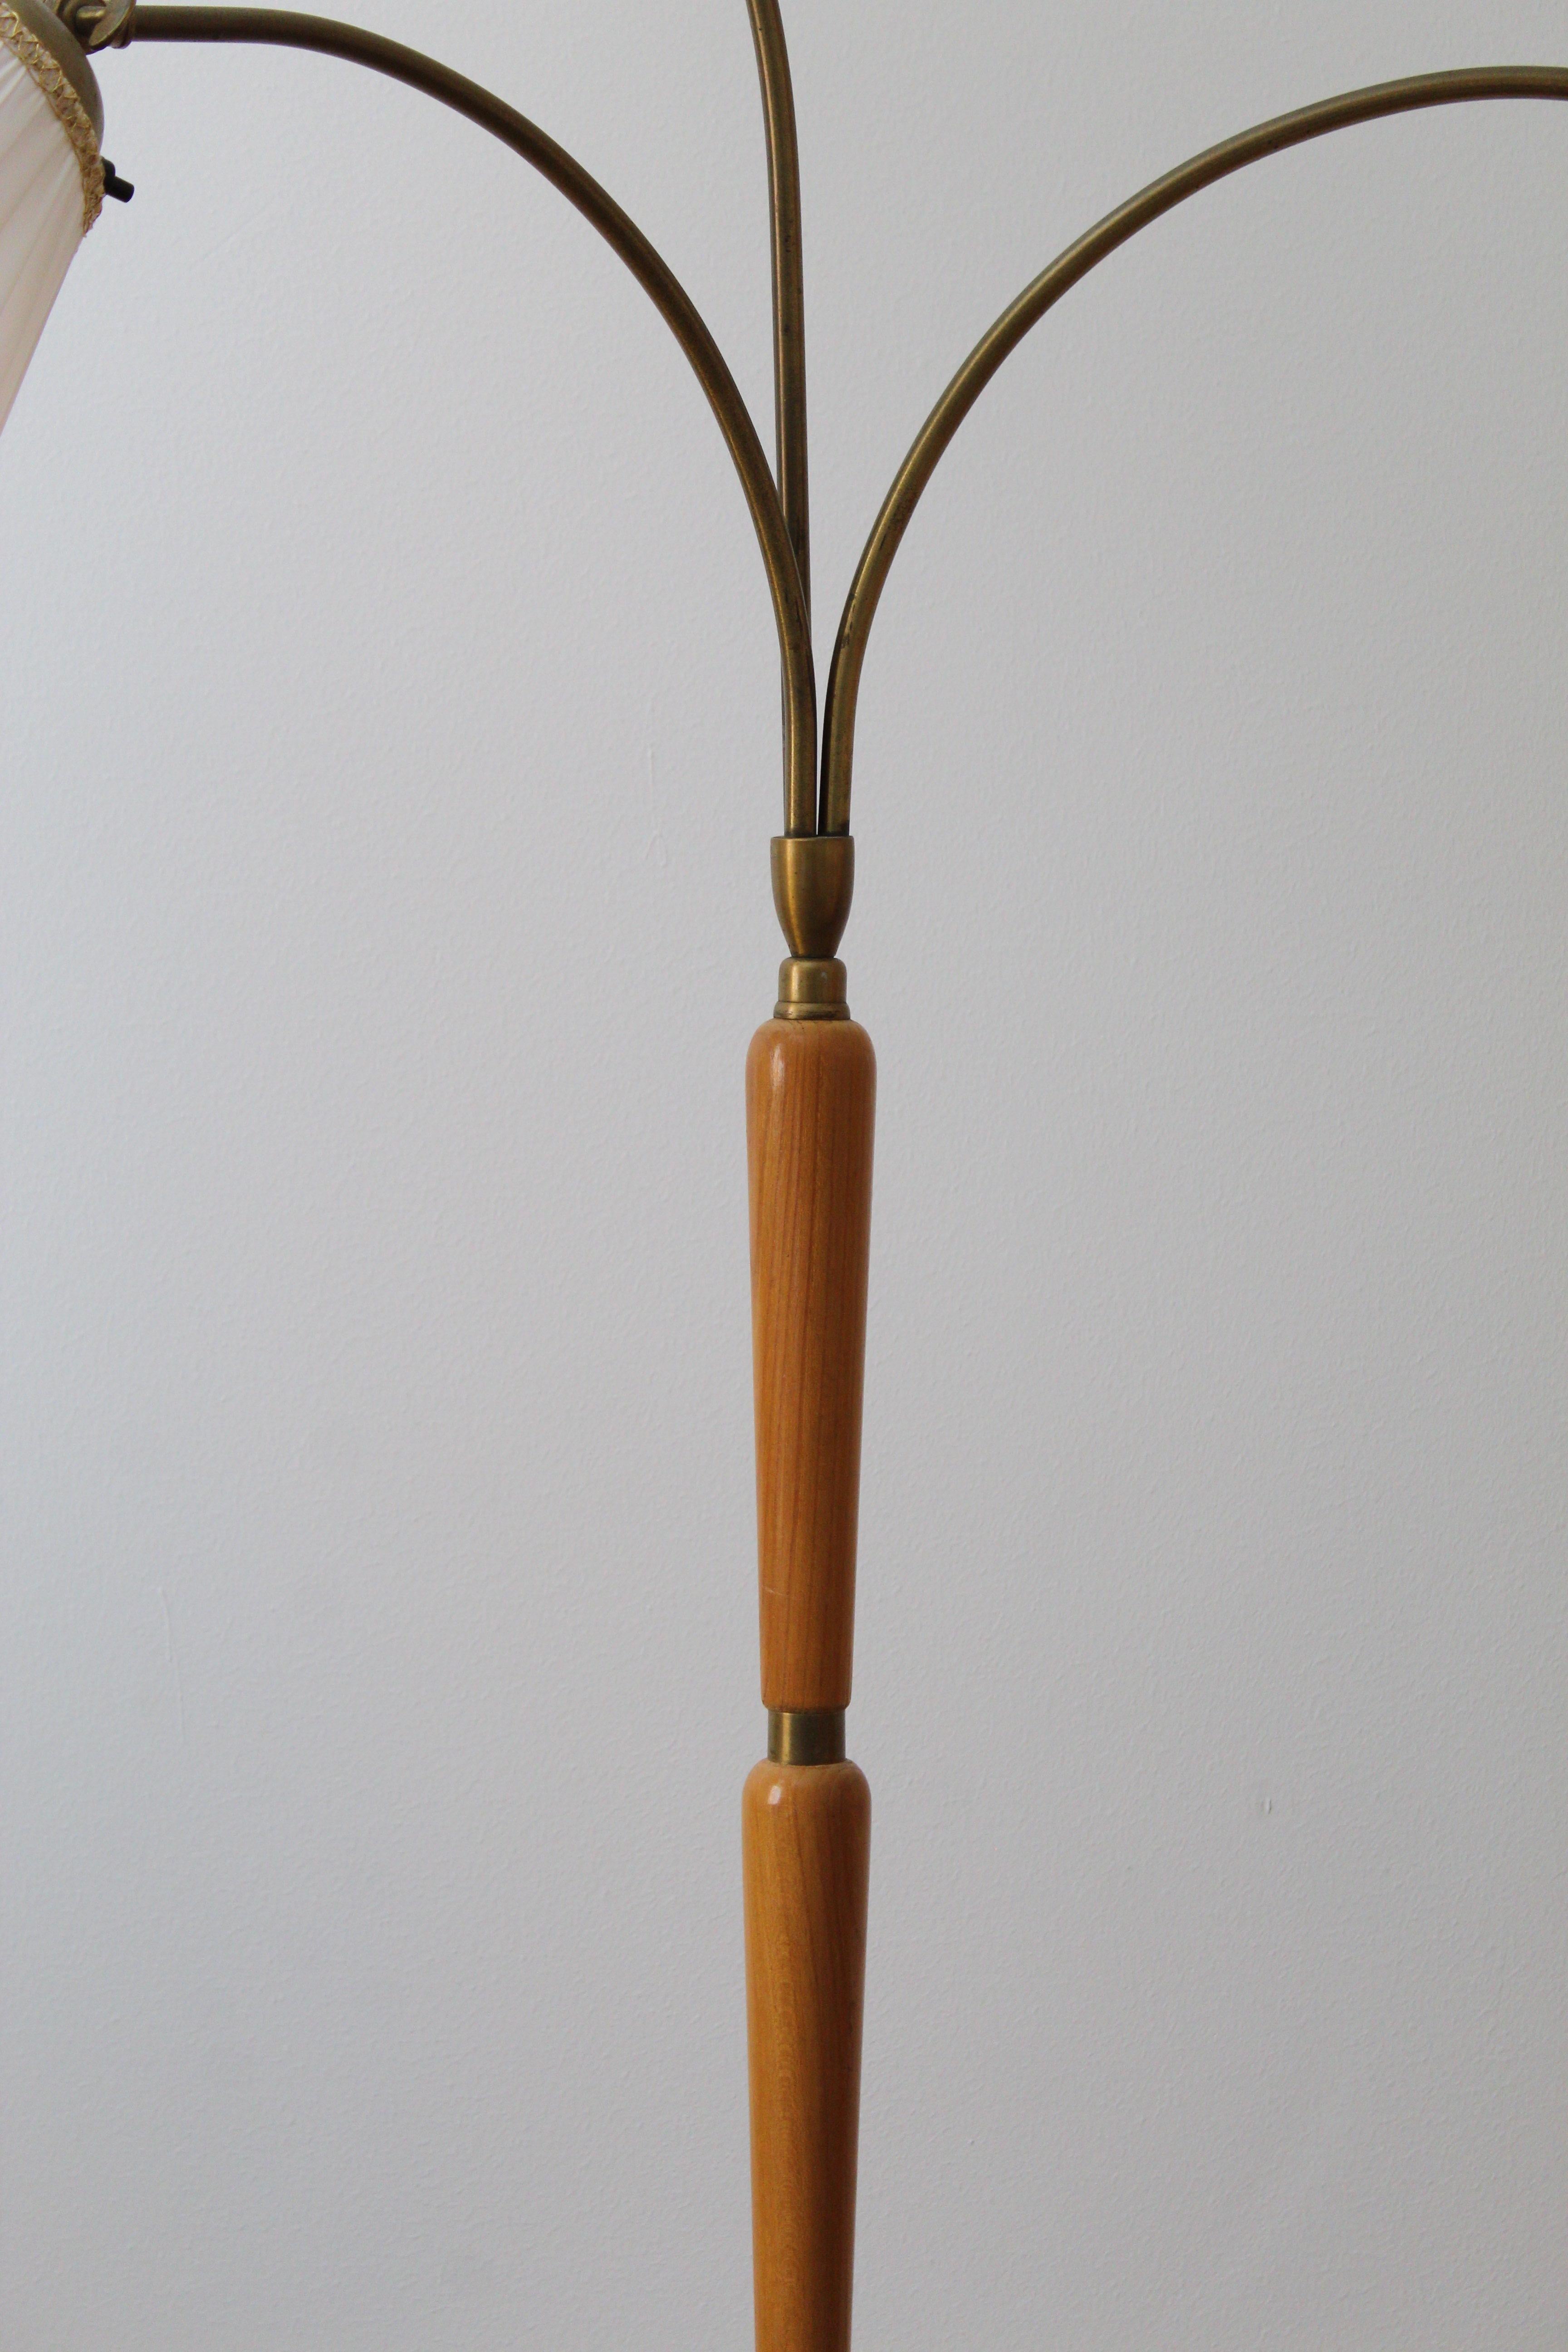 An adjustable three-armed functionalist floor lamp. With adjustable arms. Brand new Swedish-made lampshades.

Dimensions variable.

Other designers of the period include Josef Frank, Paavo Tynell, Hans Agne Jacobsen, and Alvar Aalto.